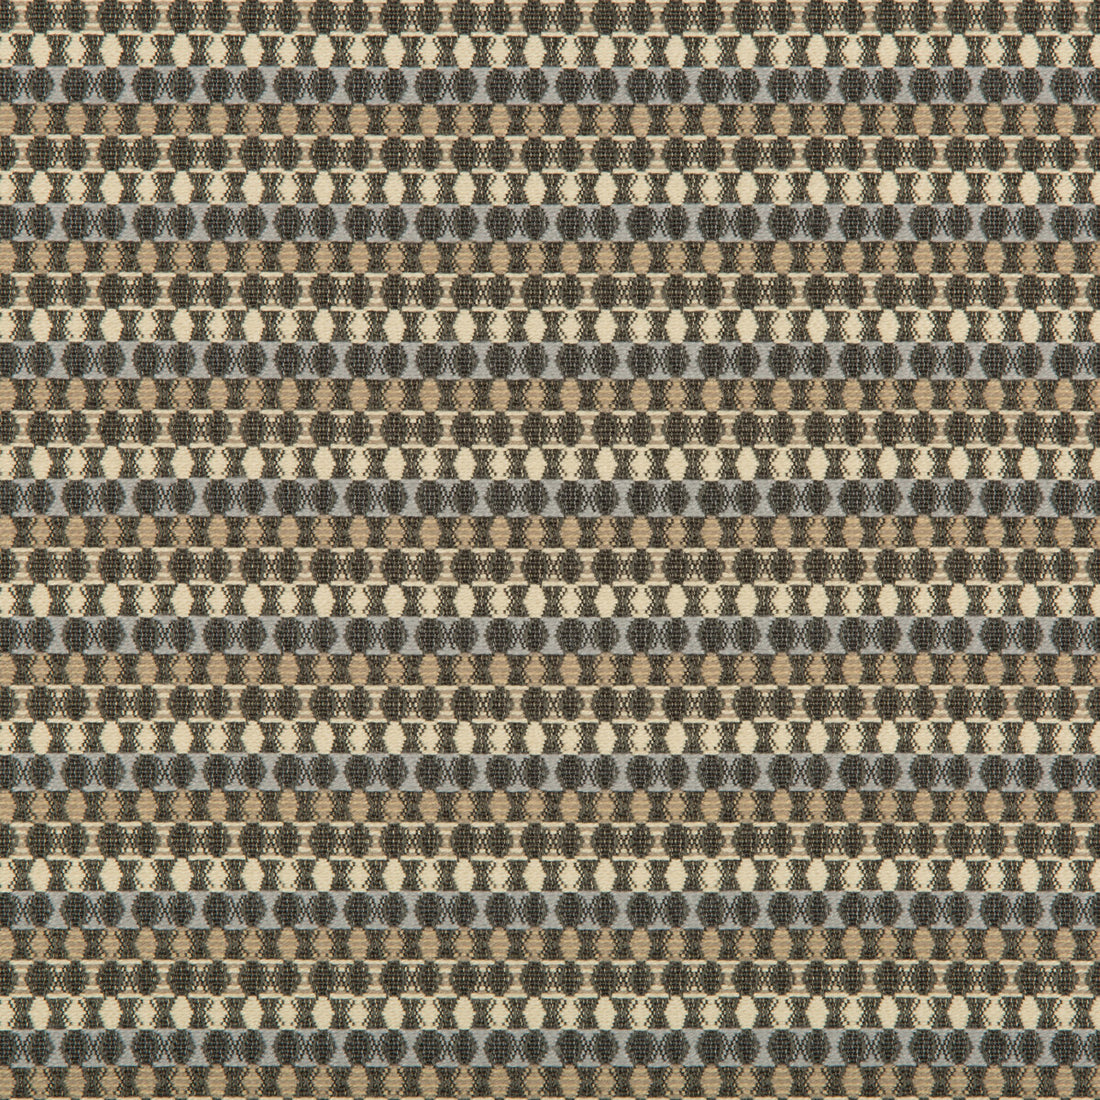 Role Model fabric in moonstone color - pattern 35092.16.0 - by Kravet Contract in the Gis Crypton collection